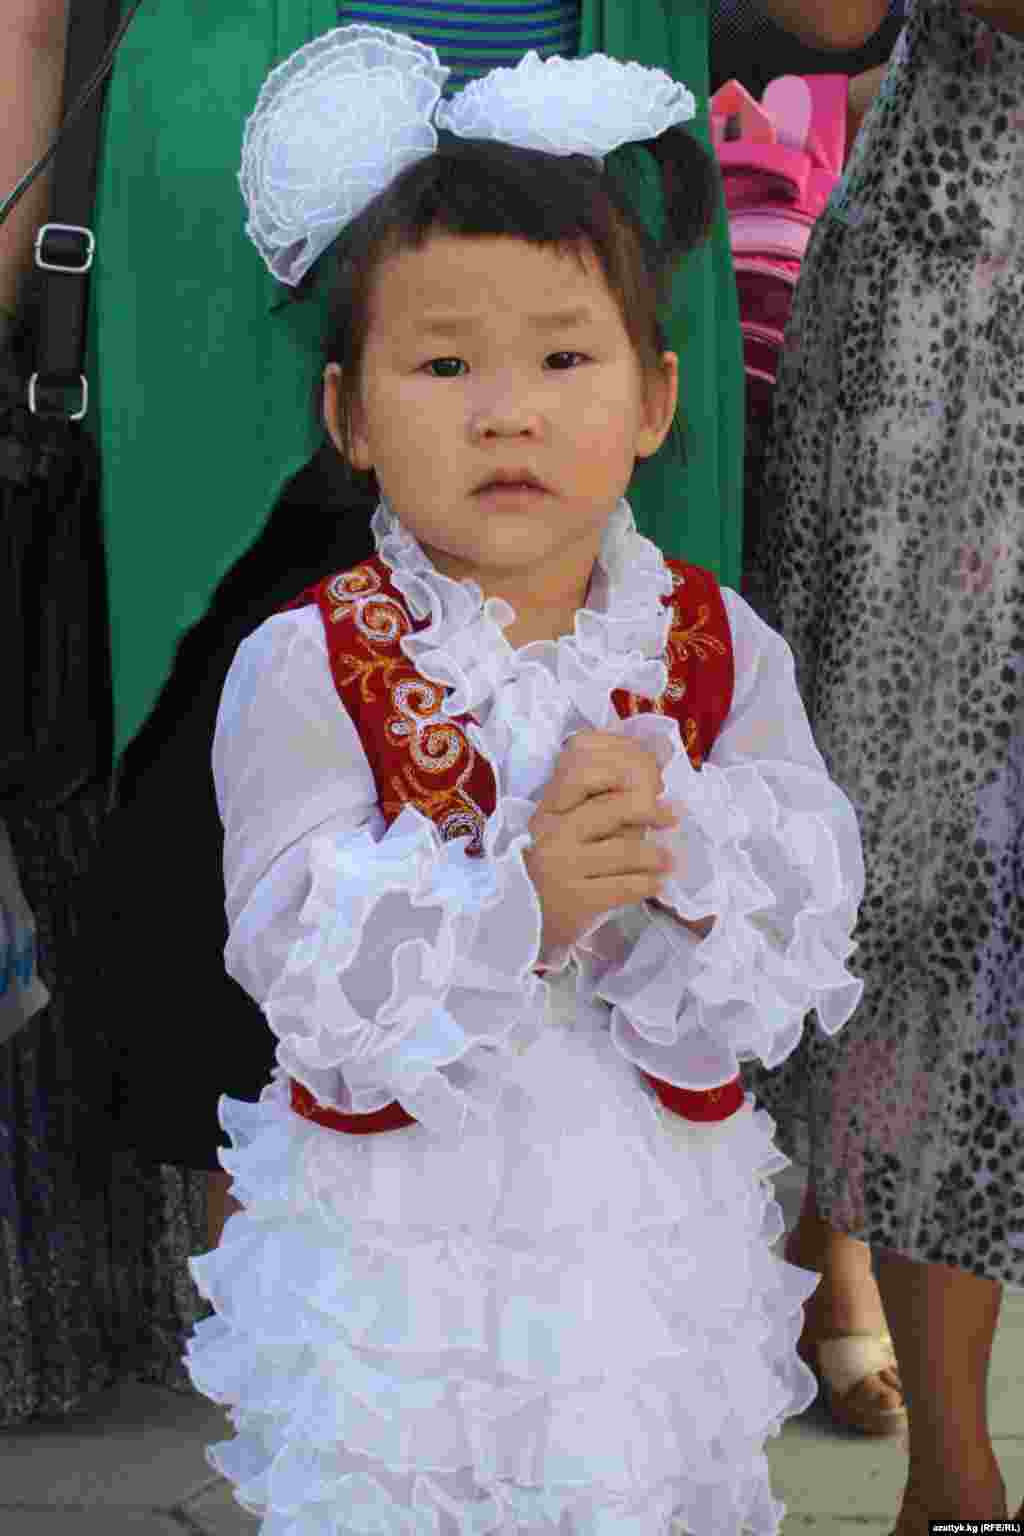 A first-grader attending a school celebration at School No. 82 at the Ala-Too settlement outside of Bishkek, Kyrgyzstan.